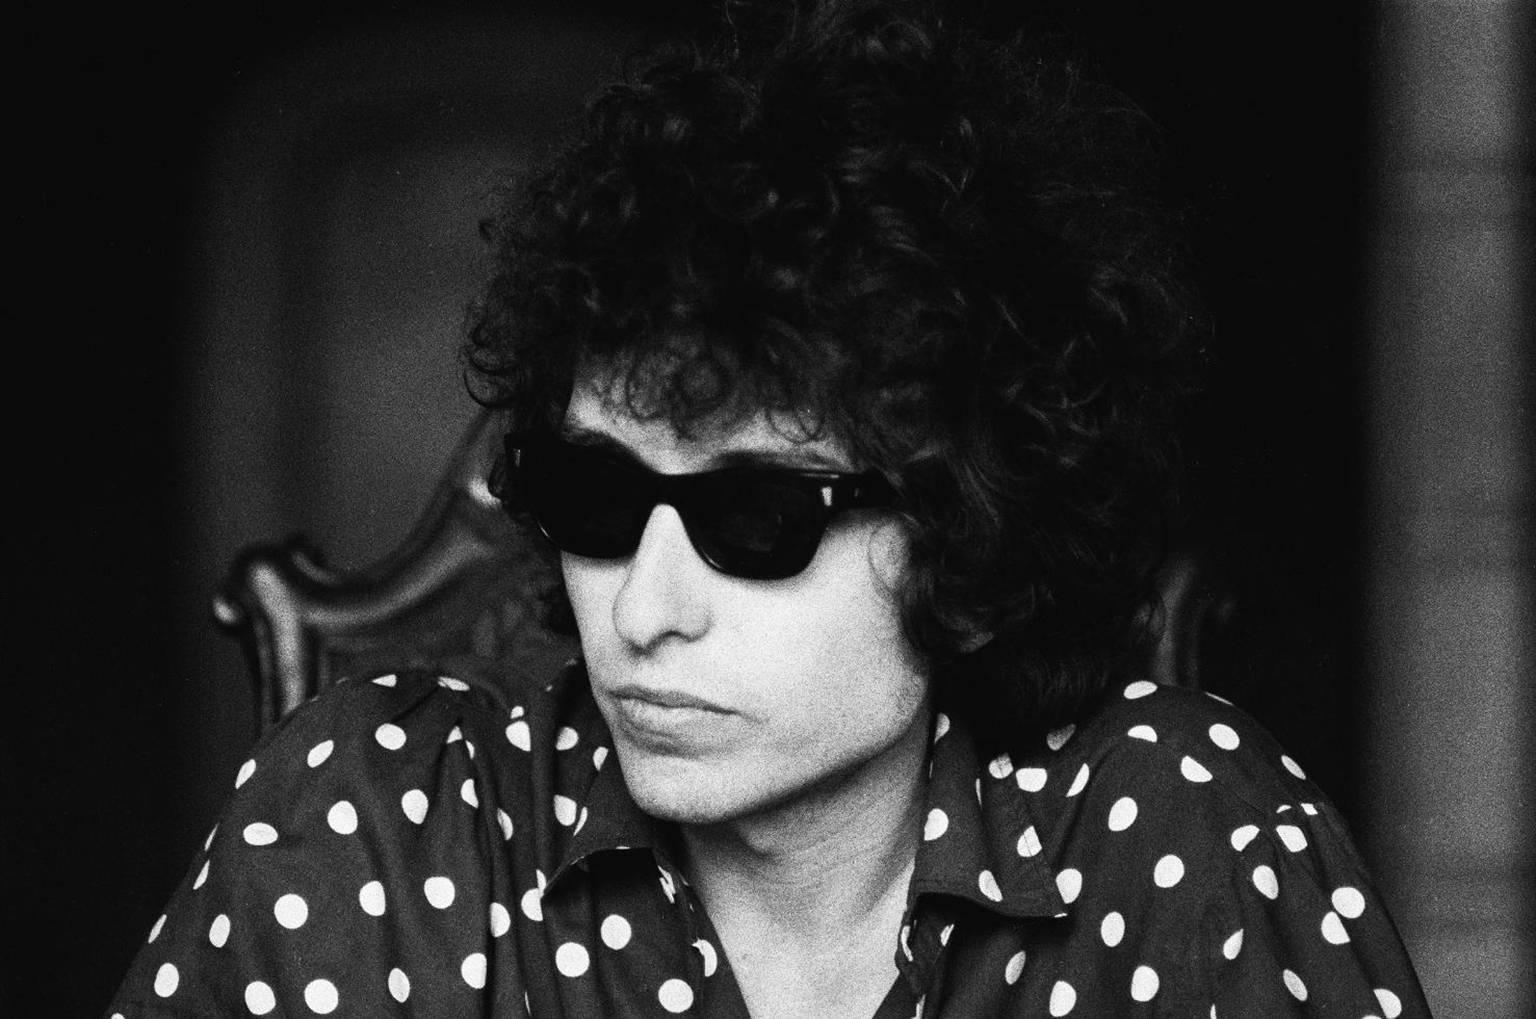 Lisa Law Black and White Photograph - Bob Dylan, Los Angeles, CA 1966